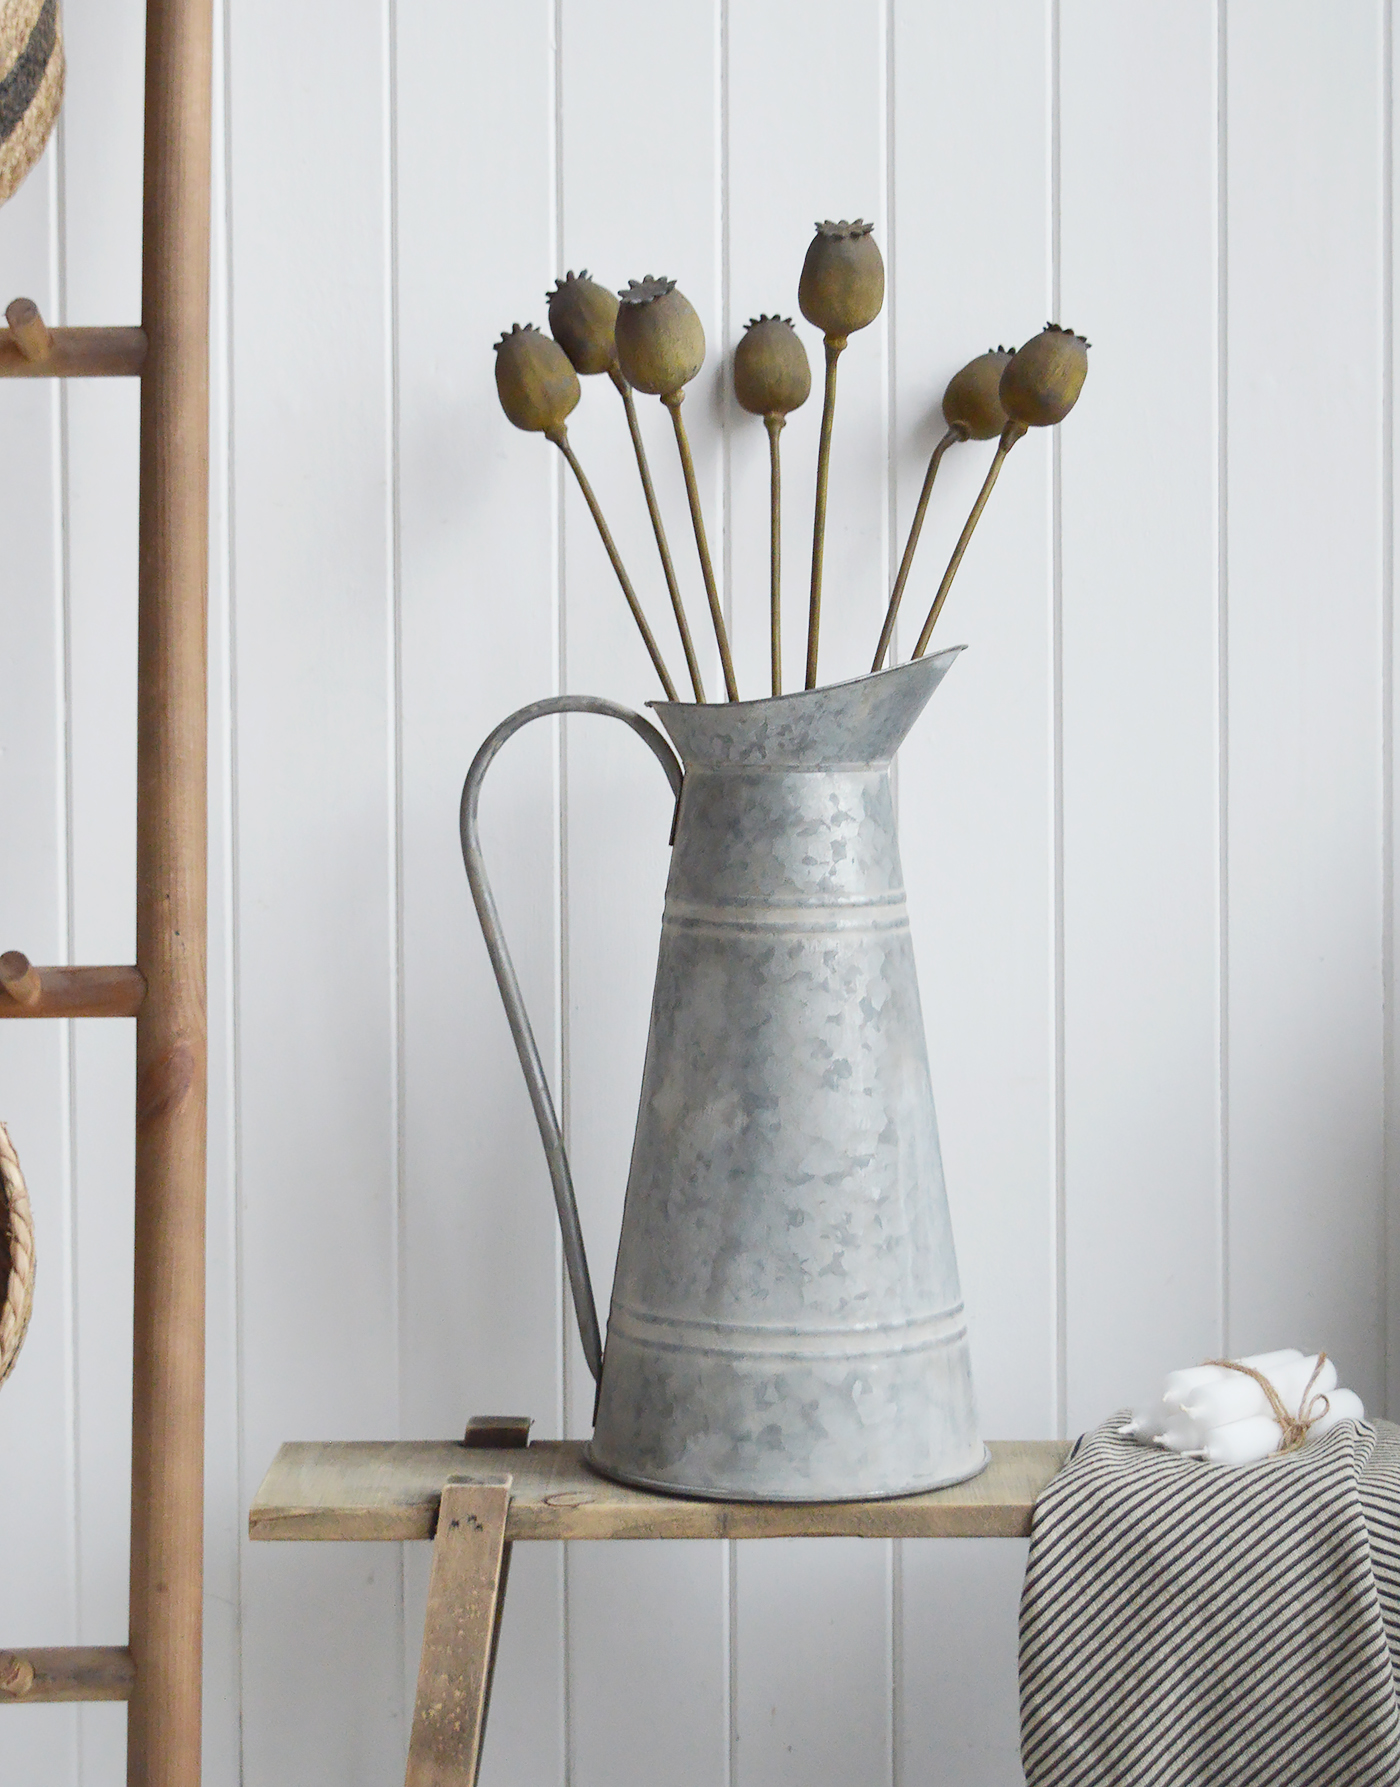 Tall zinc pitcher at 40 cm, to complement New England country, coastal and modern farmhouse home interiors and furniture